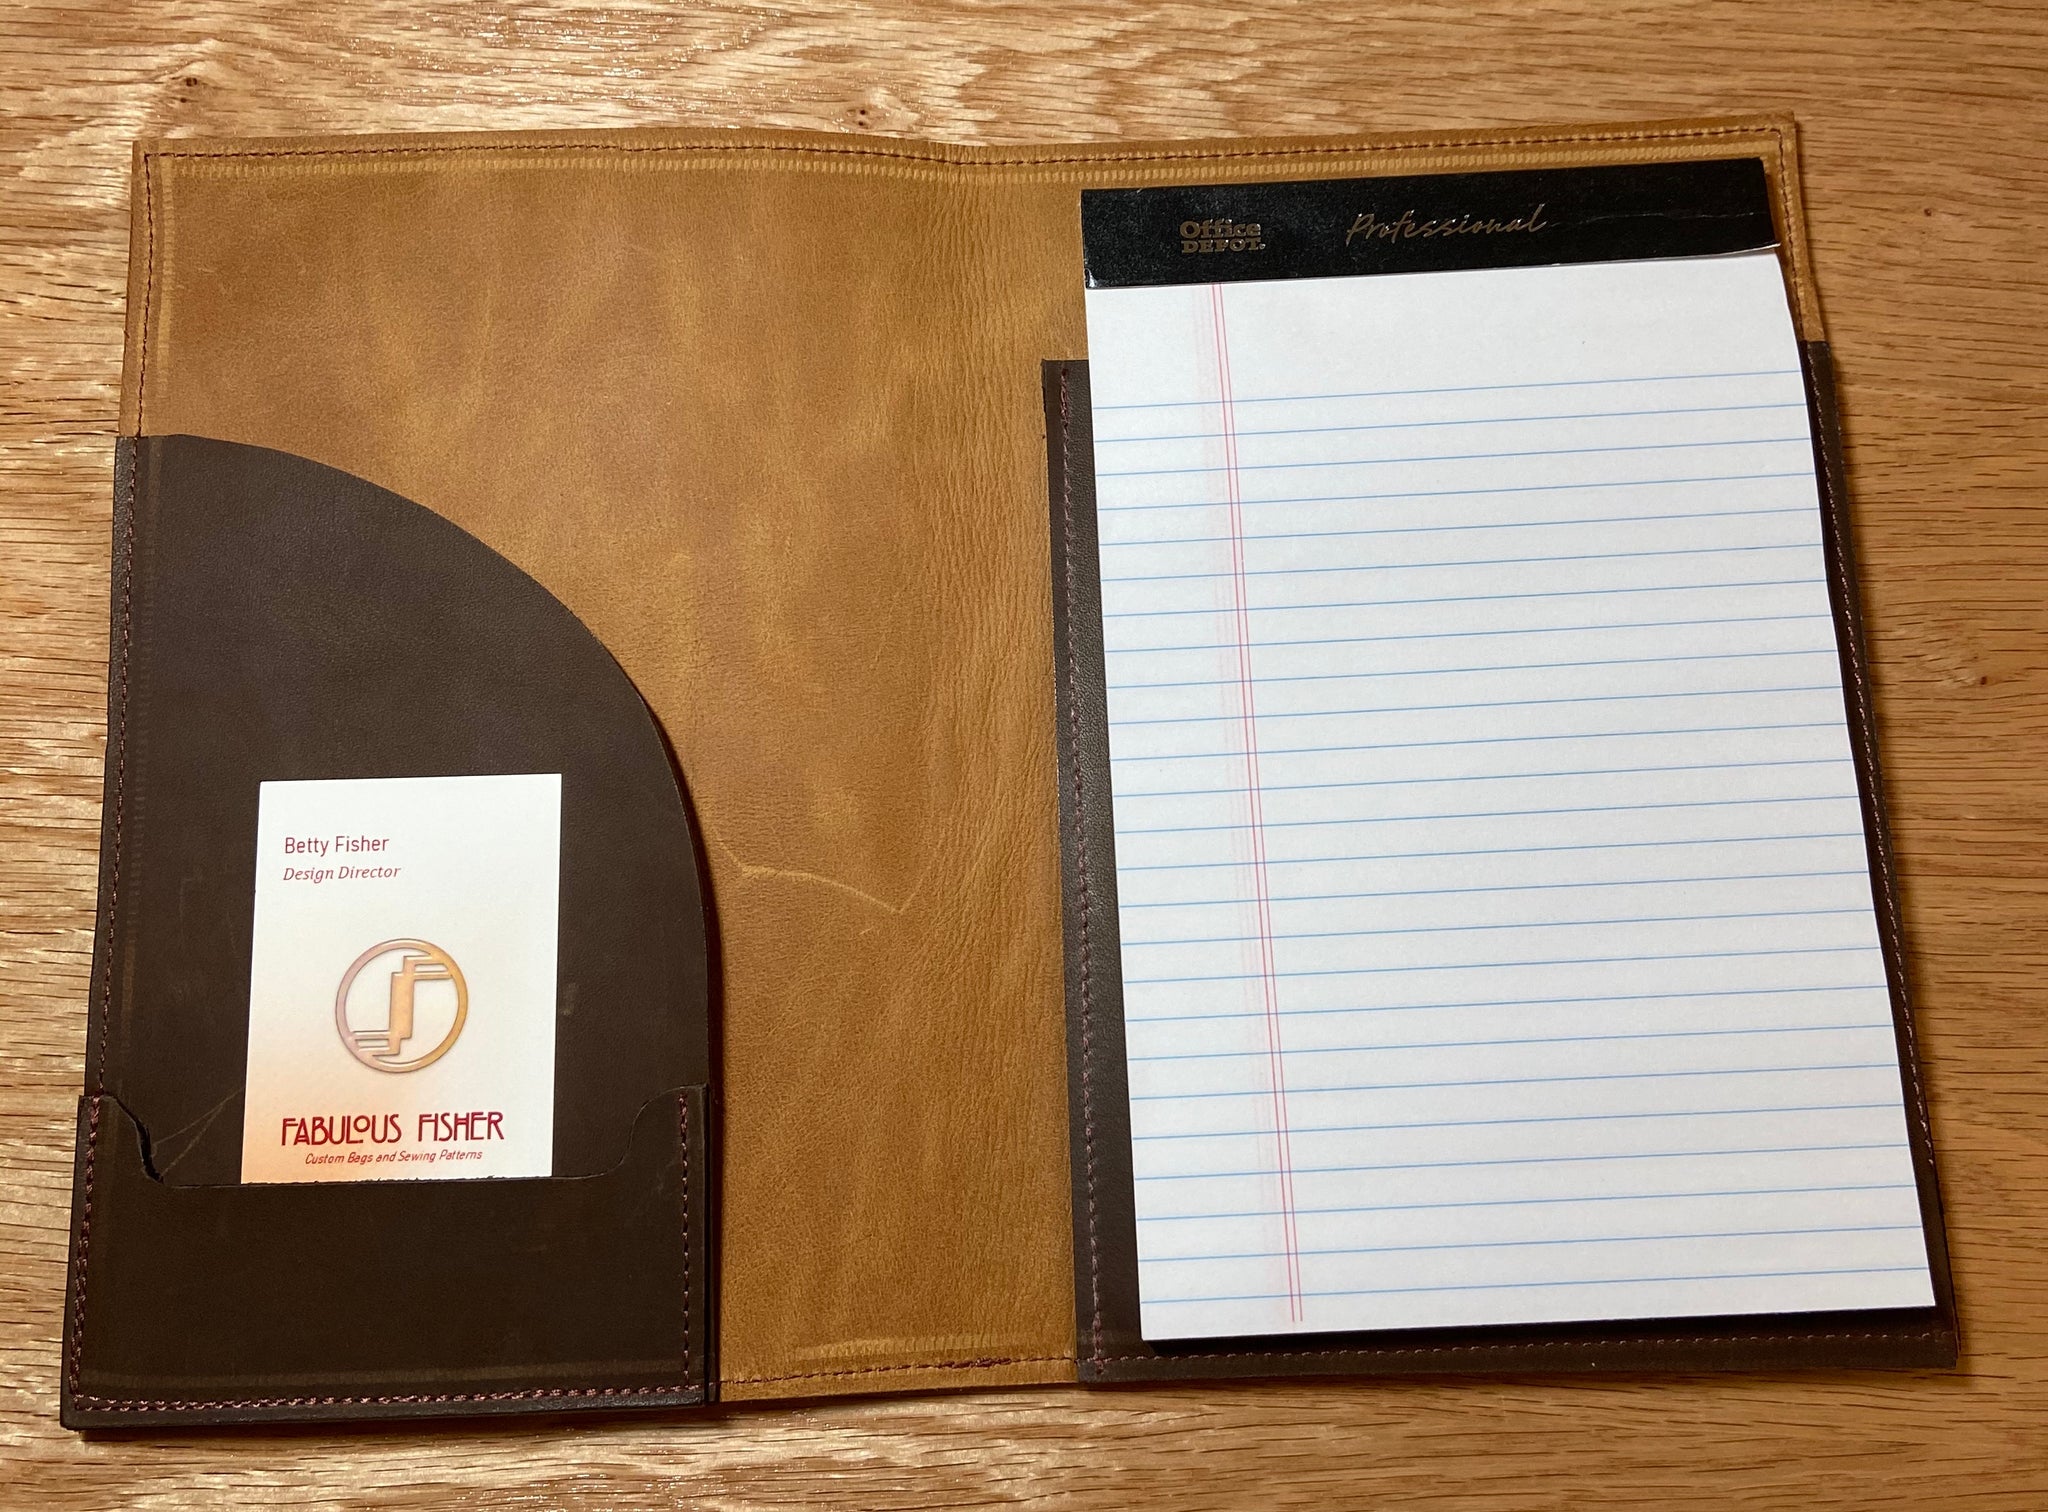 Leather Legal Pad Portfolio / Personalized Leather Legal Size